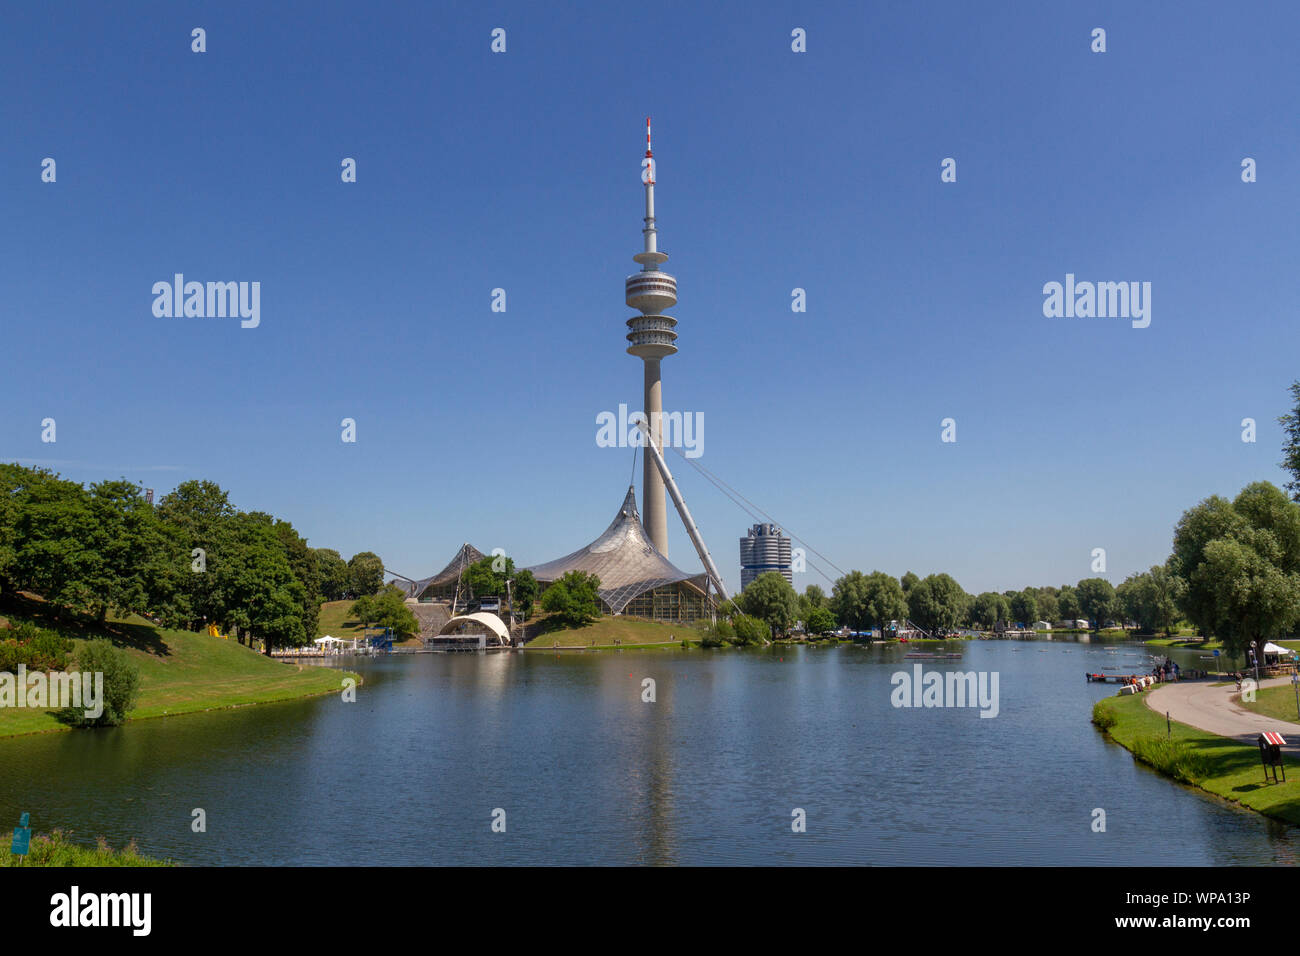 The Olympiaturm, (Olympic Tower), part of the Munich 1972 Olympic Park, Munich, Bavaria, Germany. Stock Photo